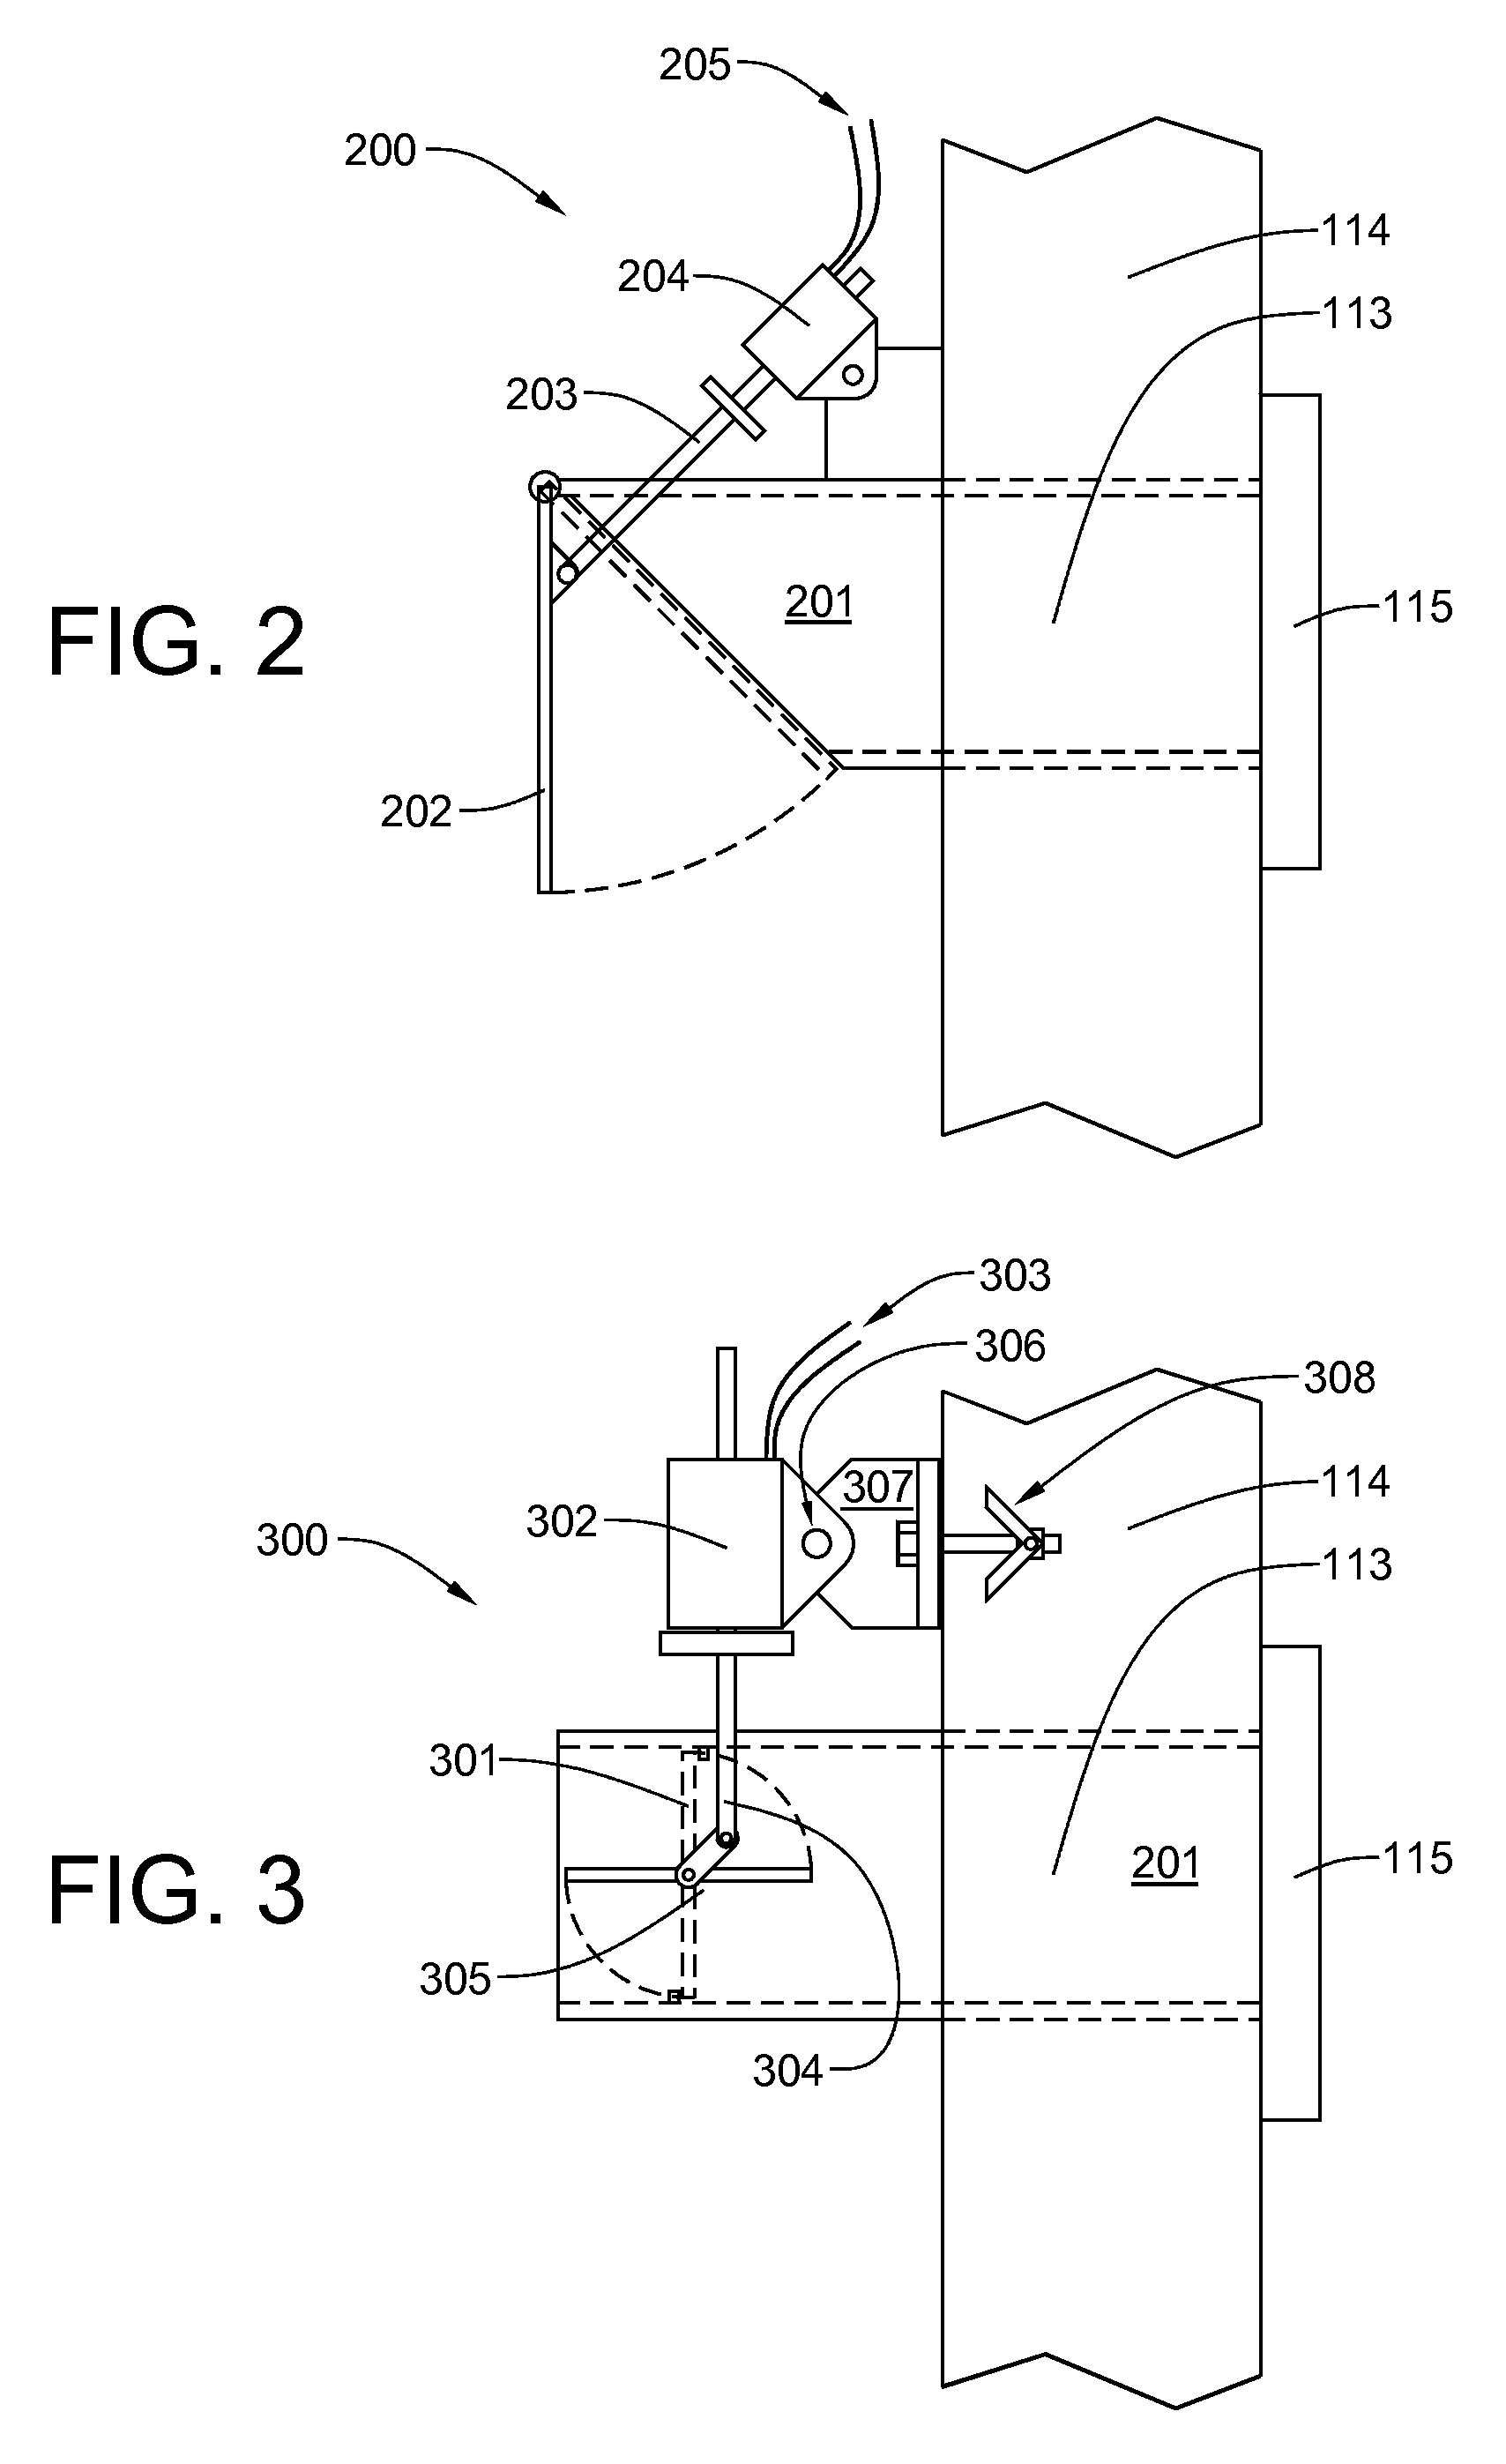 Combustion air vent control for furnaces